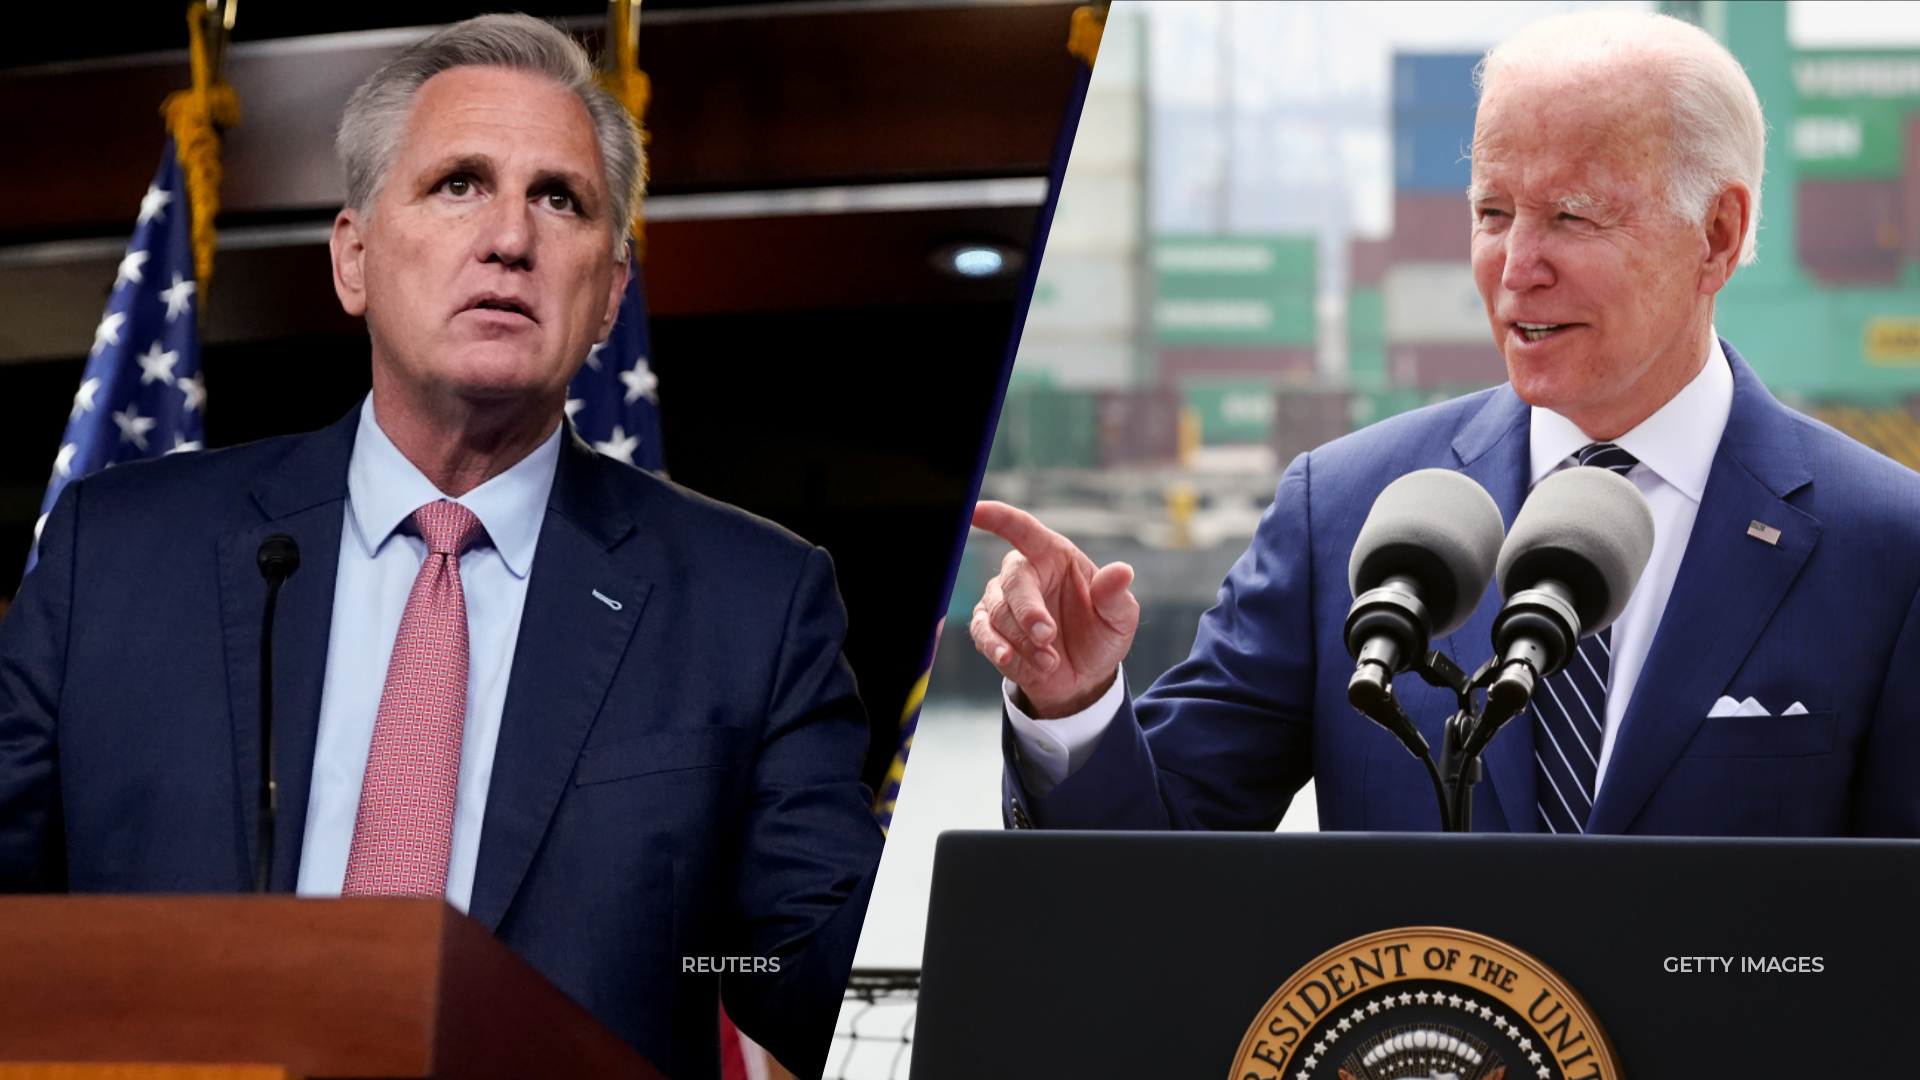 President Biden and House Minority Leader Kevin McCarthy (R-CA) are making dueling speeches in Pennsylvania as a campaign push for the midterms begins.